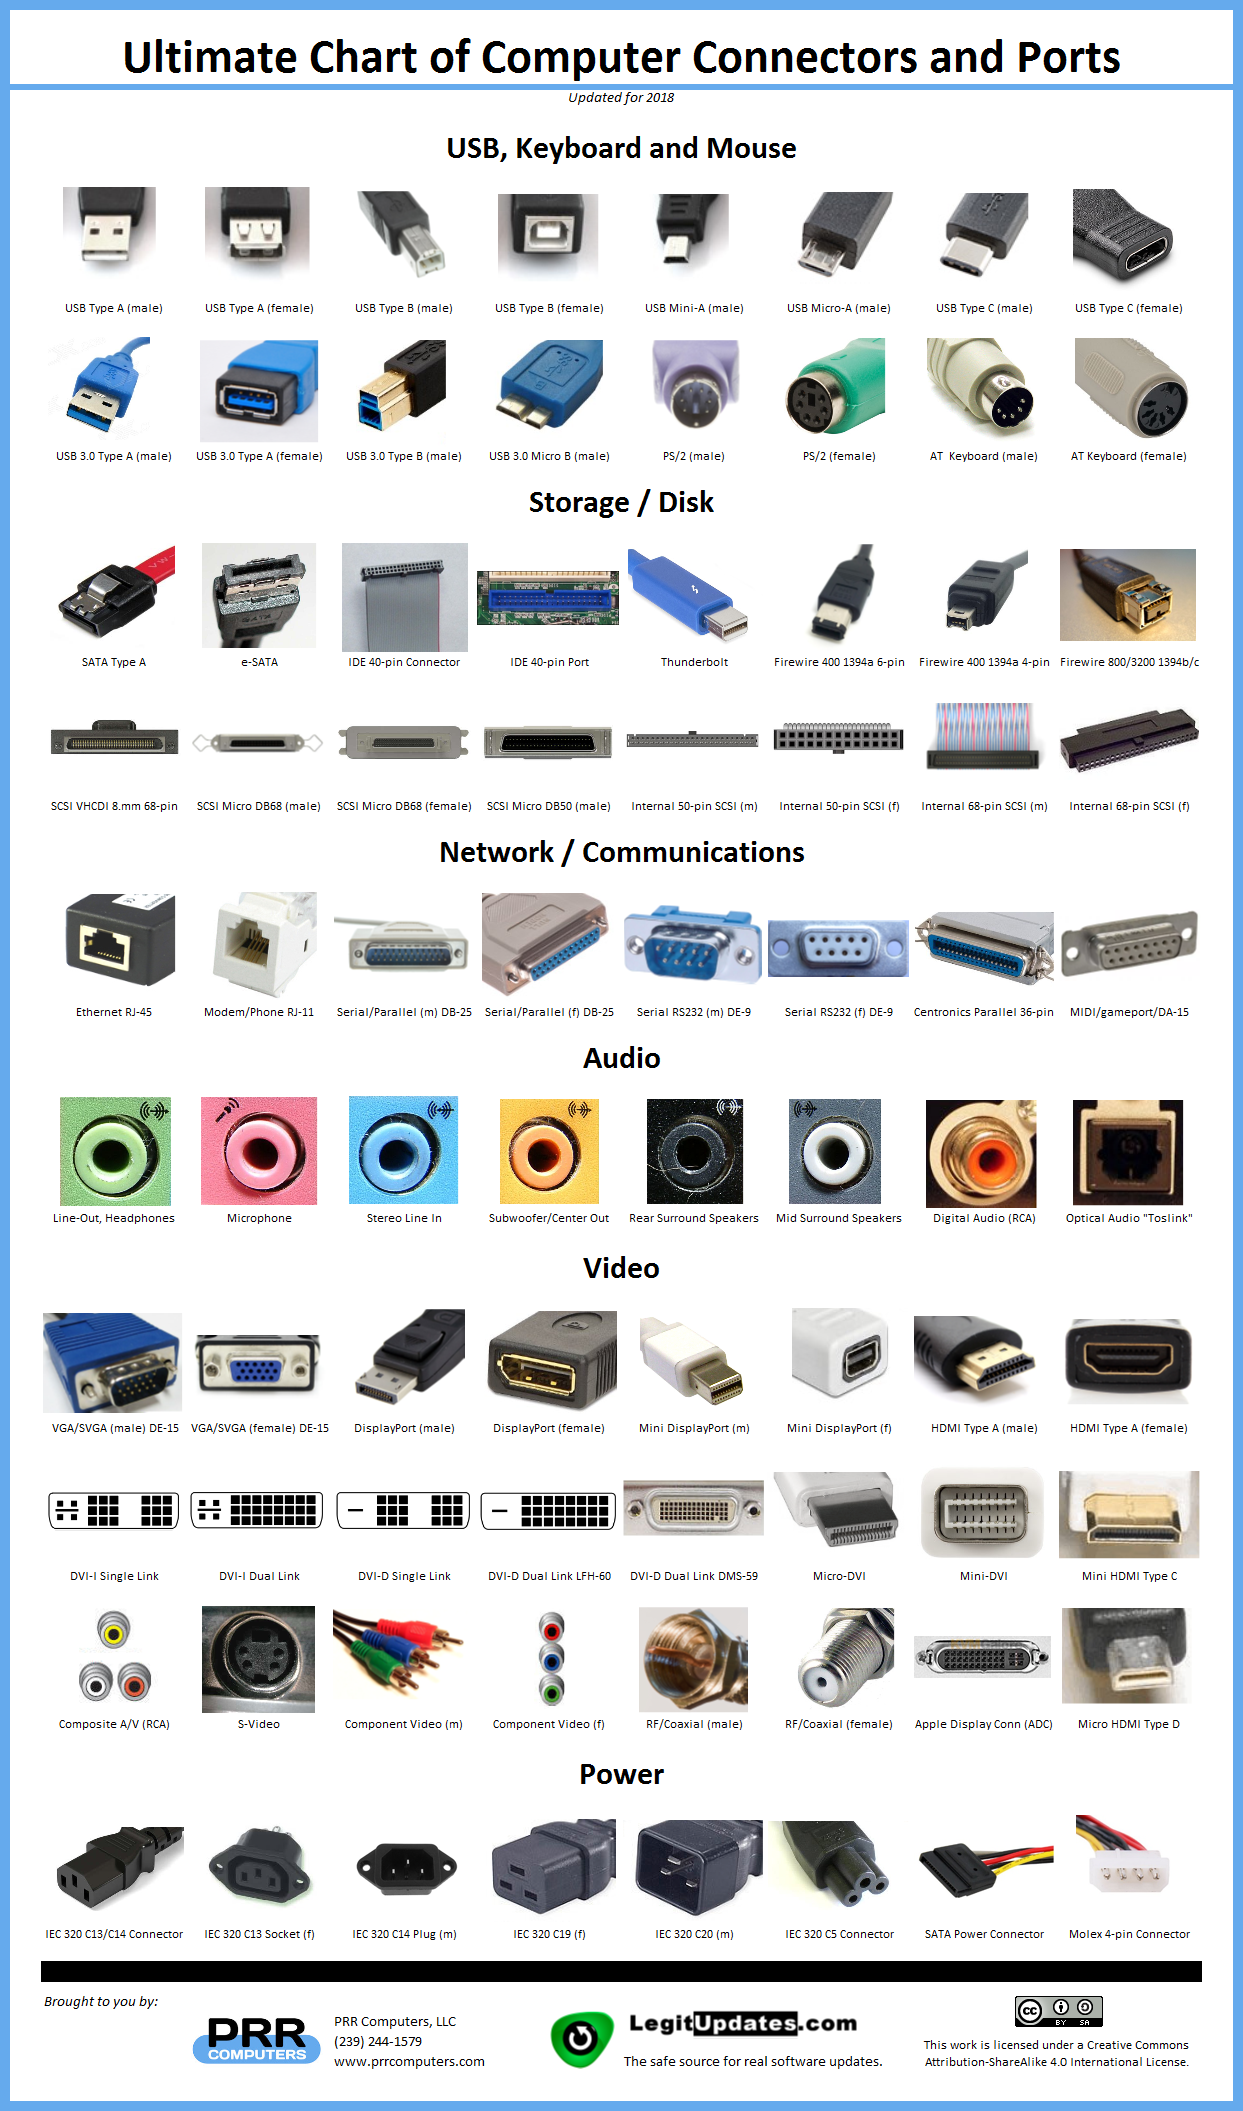 computer cable connector types - Ultimate Chart of Computer Connectors and Ports Usb, Keyboard and Mouse Storage Disk Network Communications Prro .com